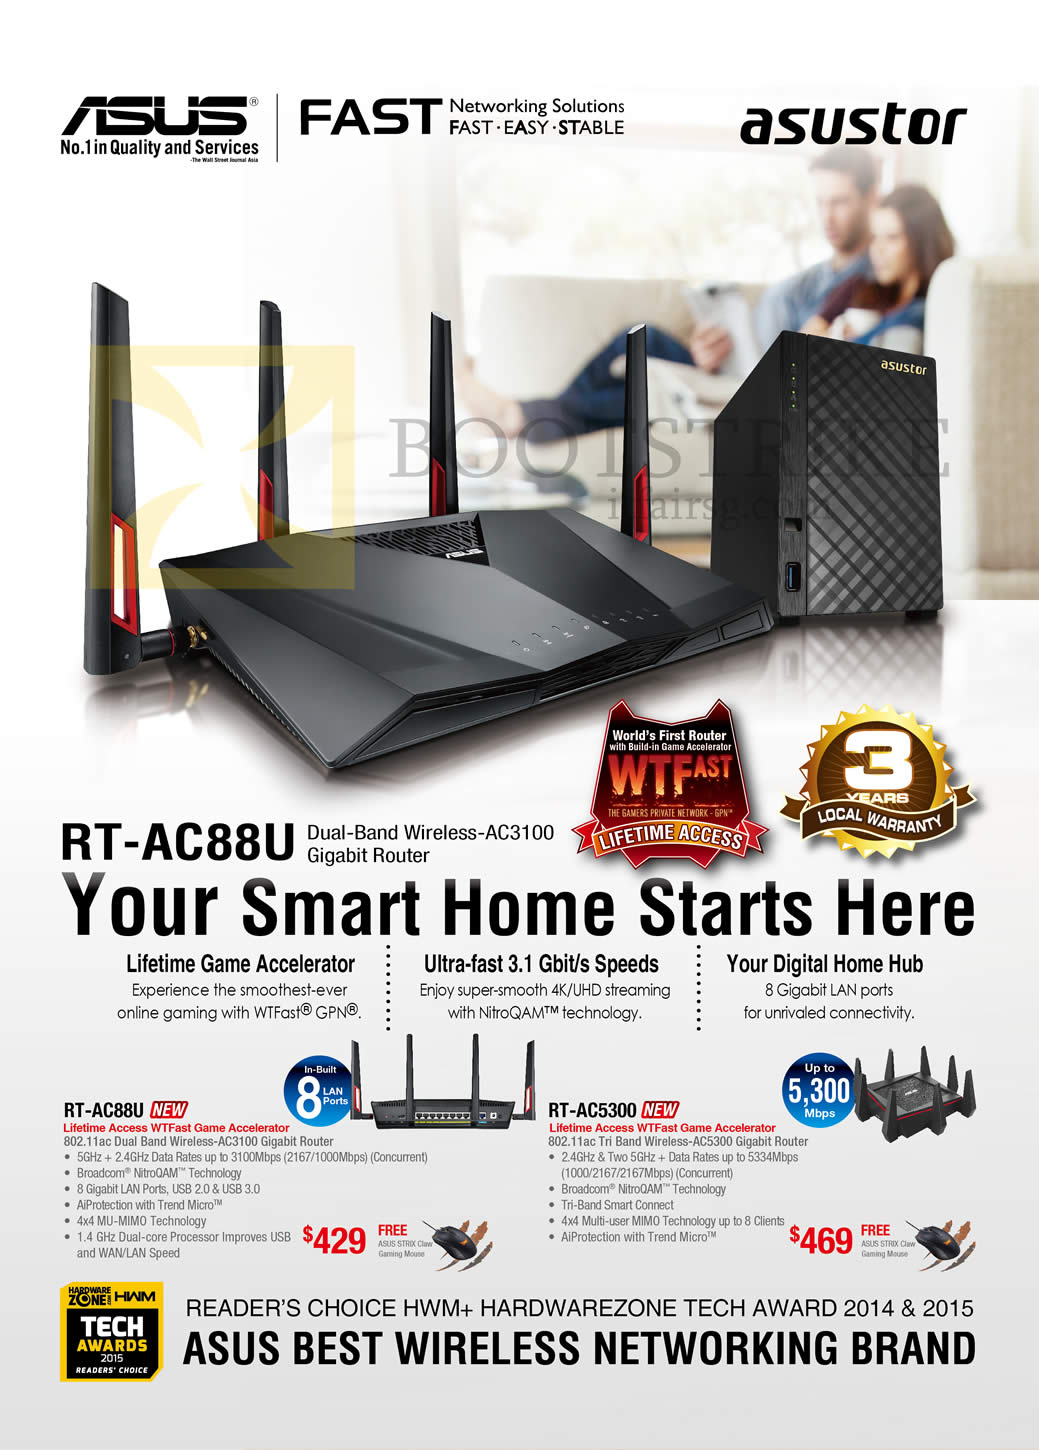 SITEX 2015 price list image brochure of ASUS Networking ASUStor Wireless Router RT-AC88U, RT-AC5300